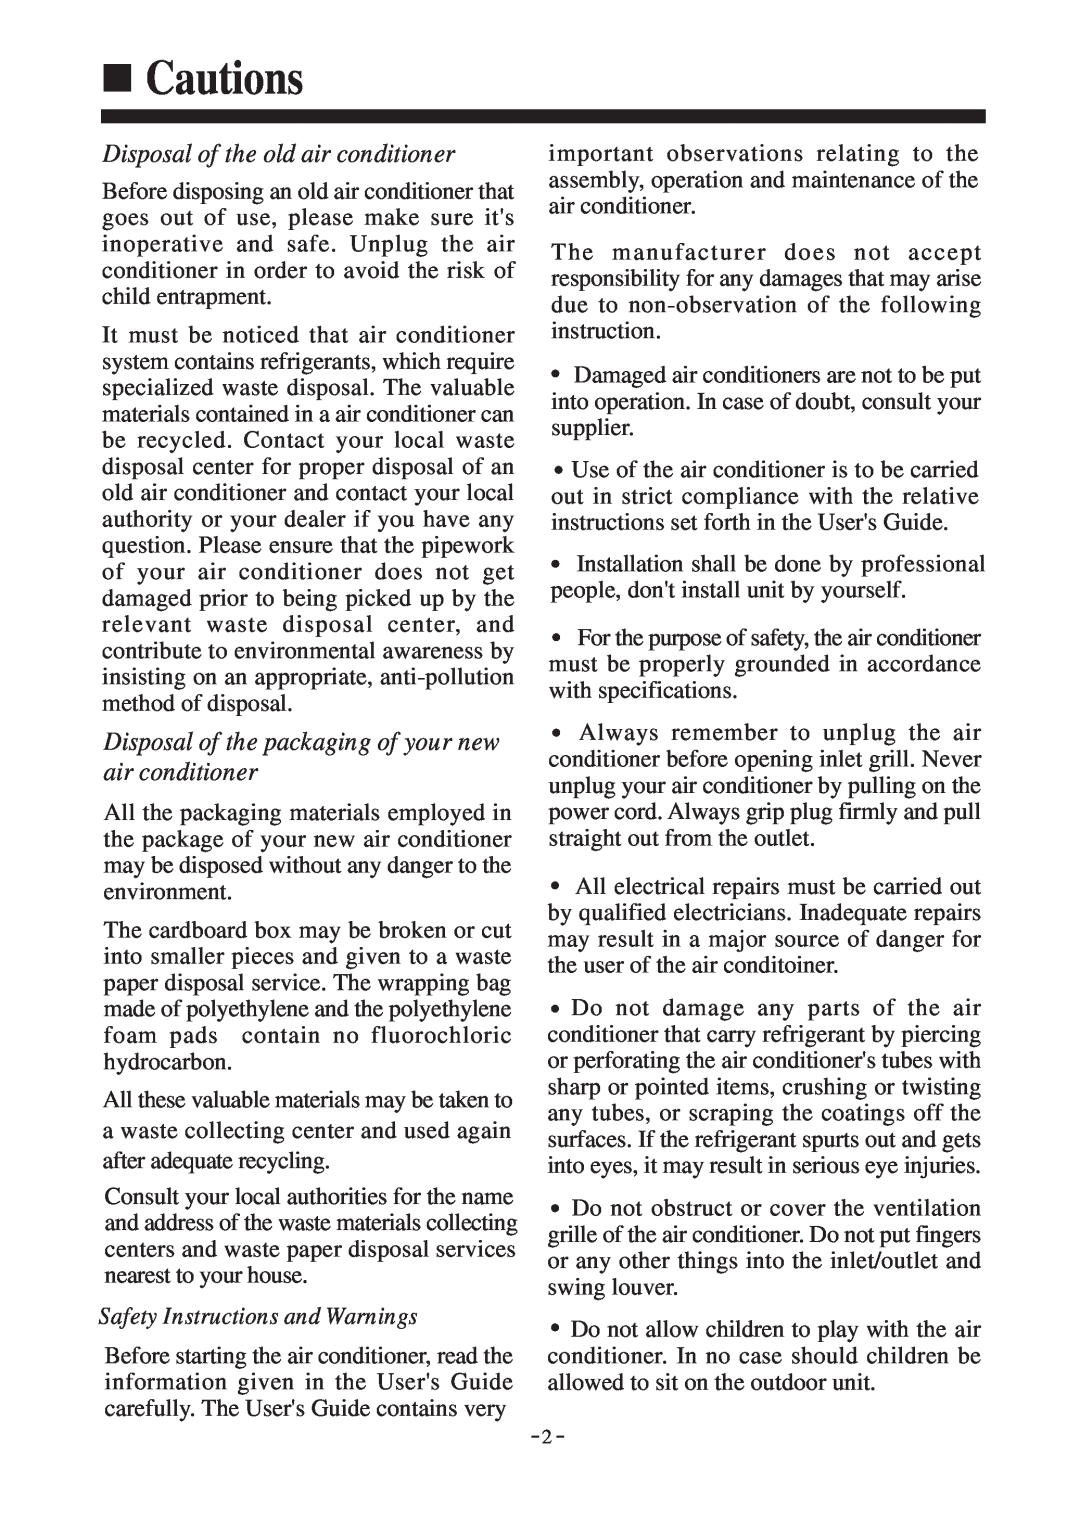 Haier AD242AMBEA, AD42NAMBEA, AD36NAMBEA Cautions, Disposal of the old air conditioner, Safety Instructions and Warnings 